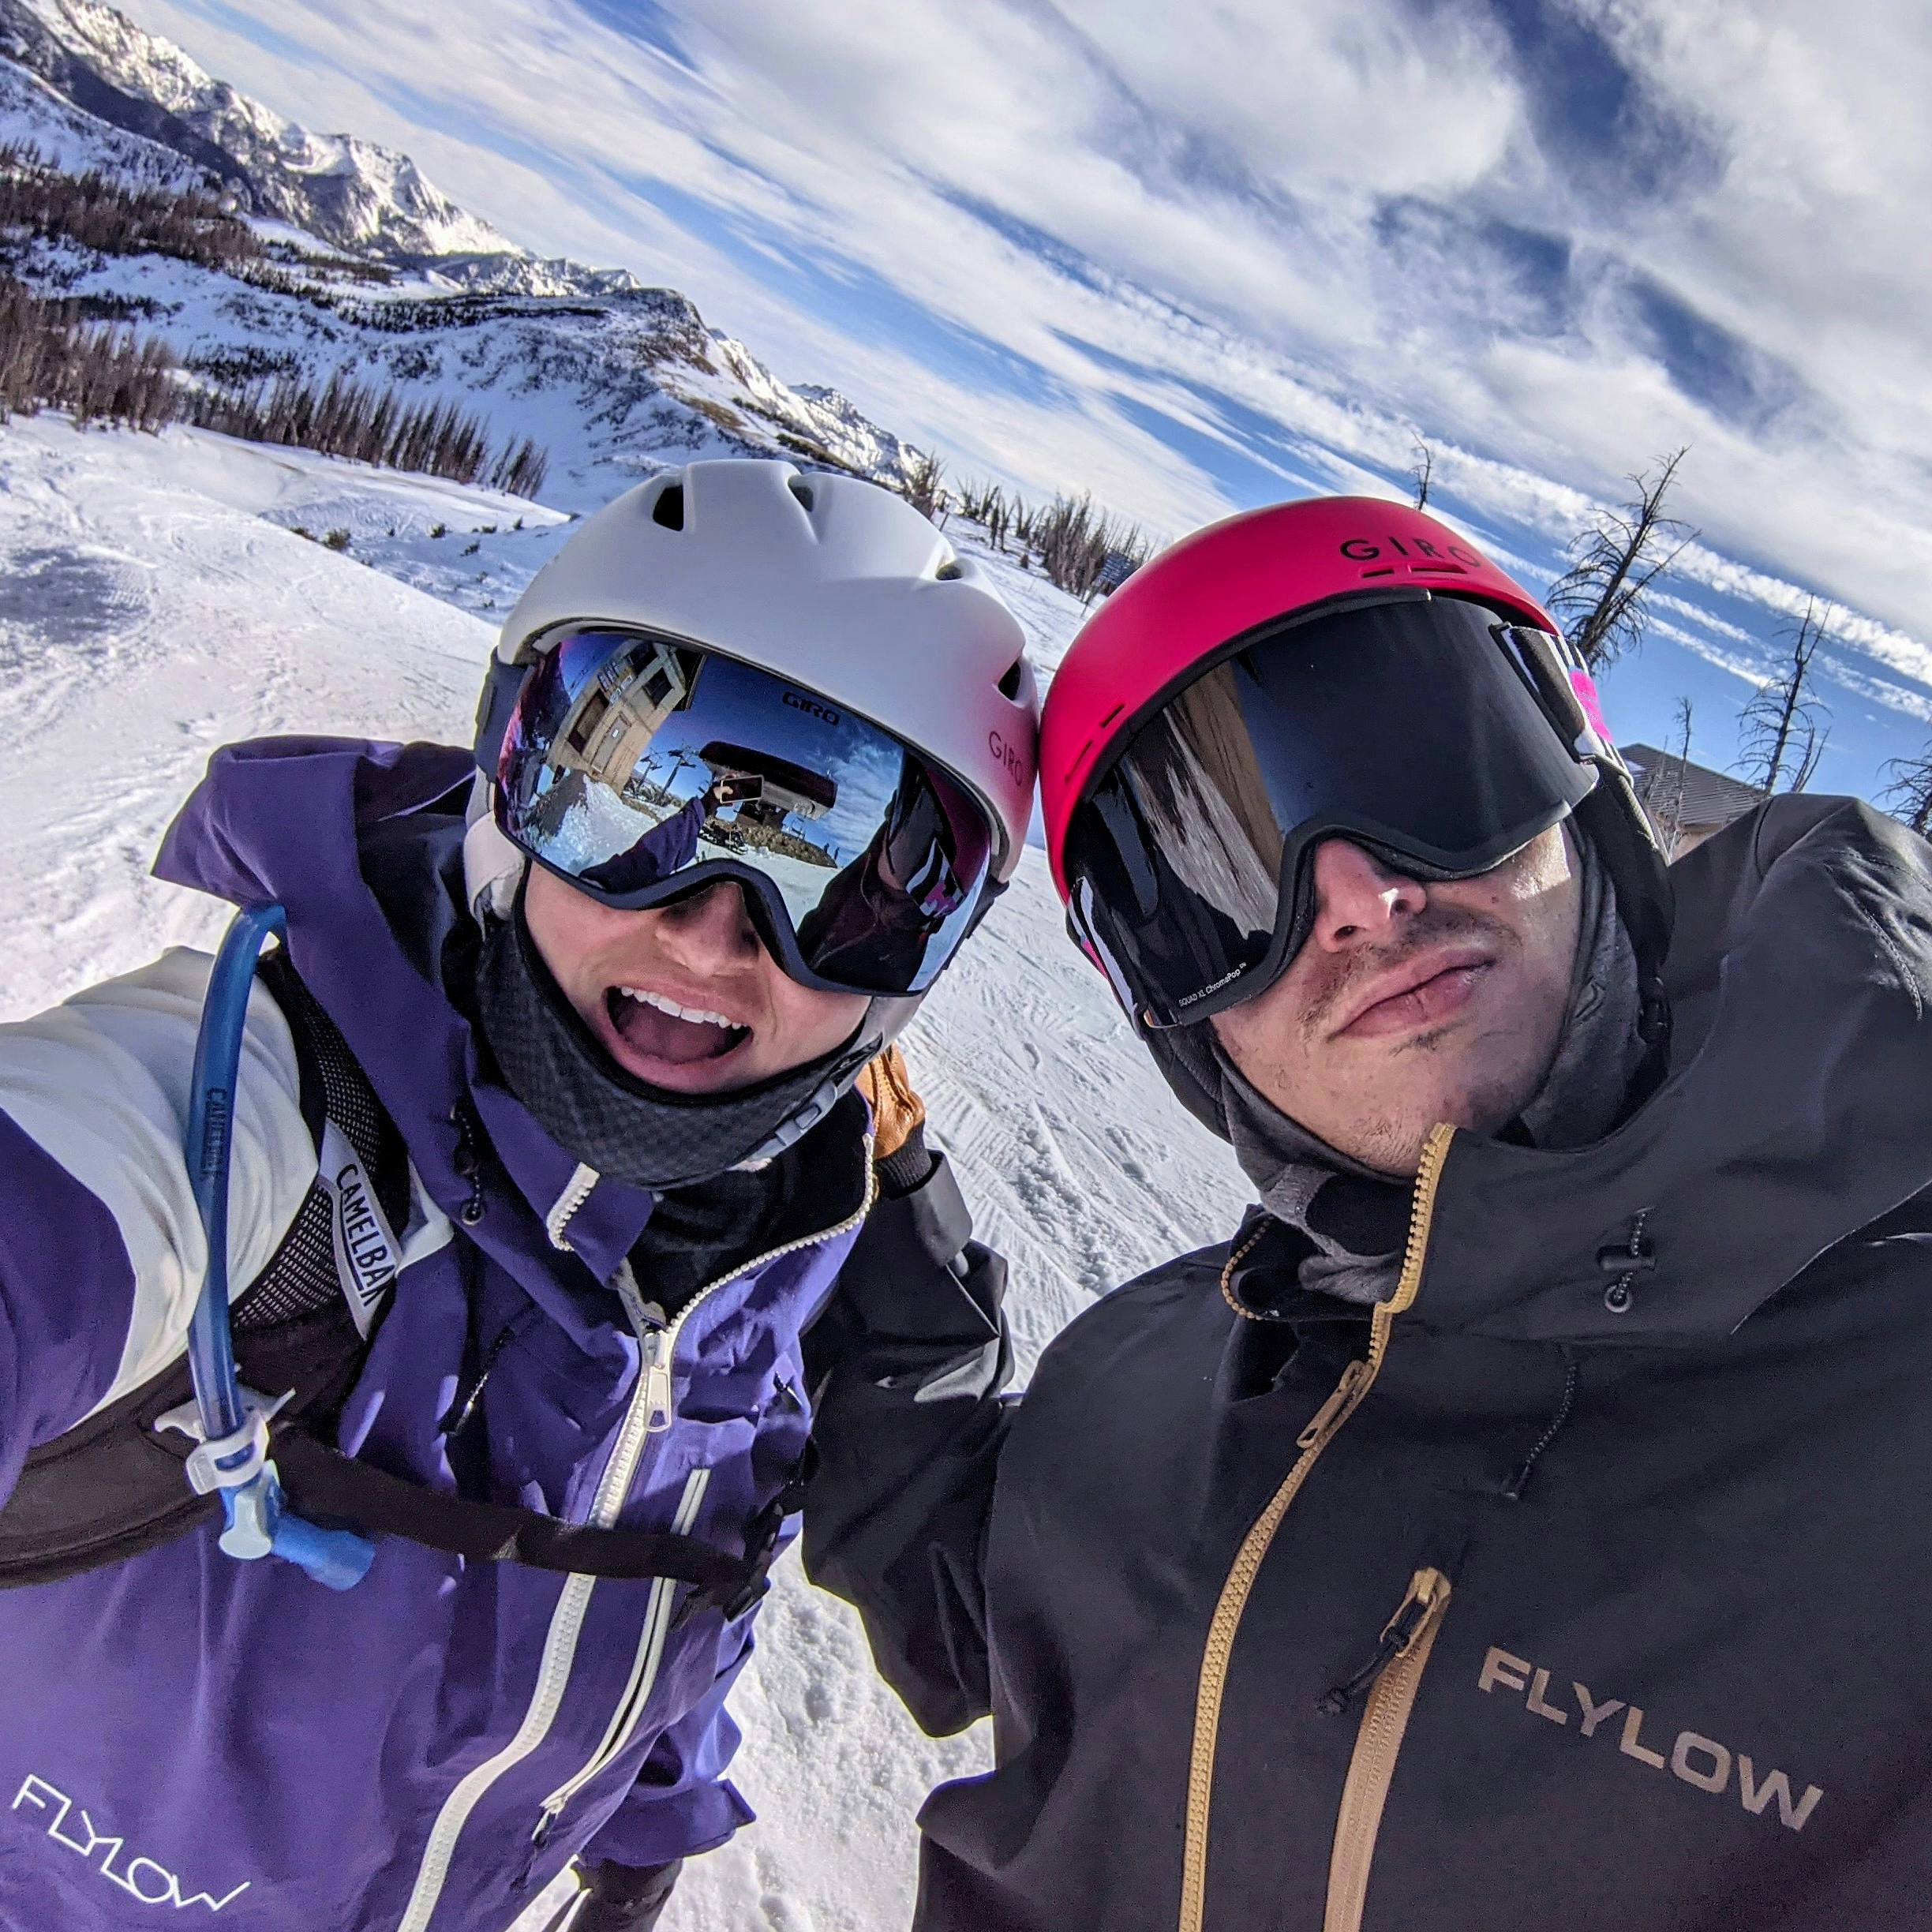 A skier taking a selfie with another skier. They are both wearing helmets and smiling. There is a snowy ski mountain in the background. 